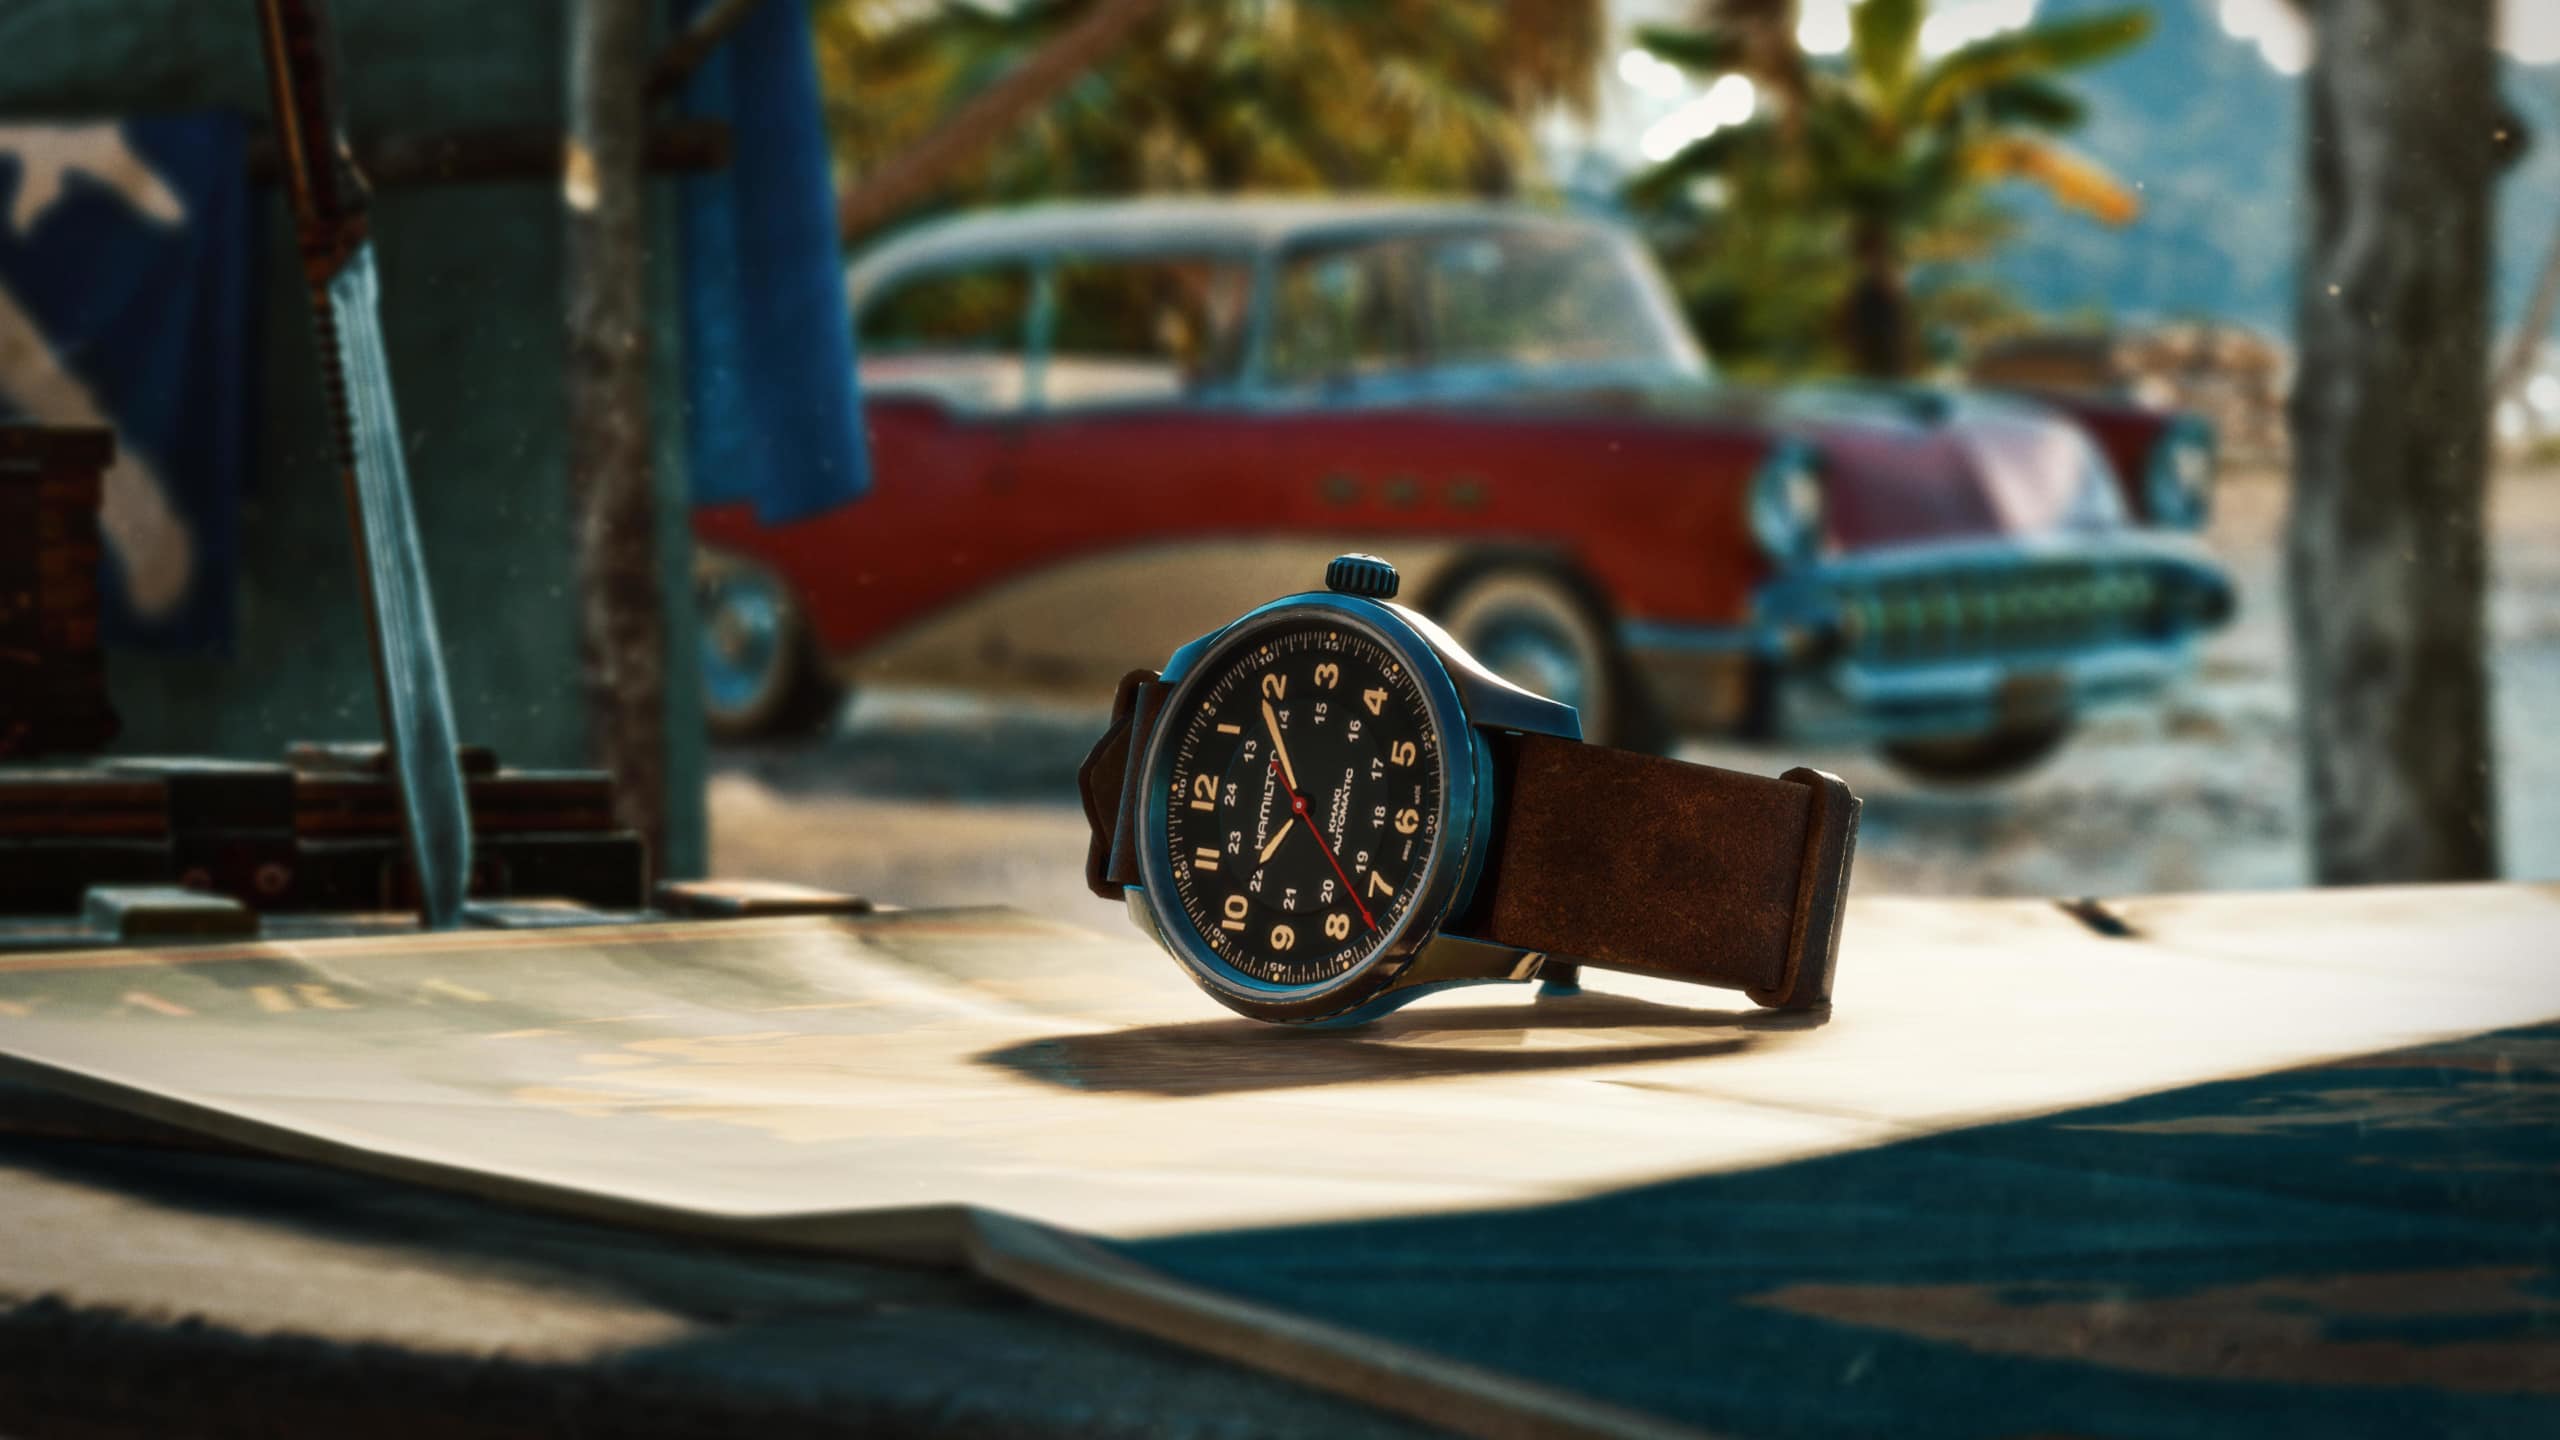 Hamilton Goes Gaming With New Khaki Field Watch For Far Cry 6